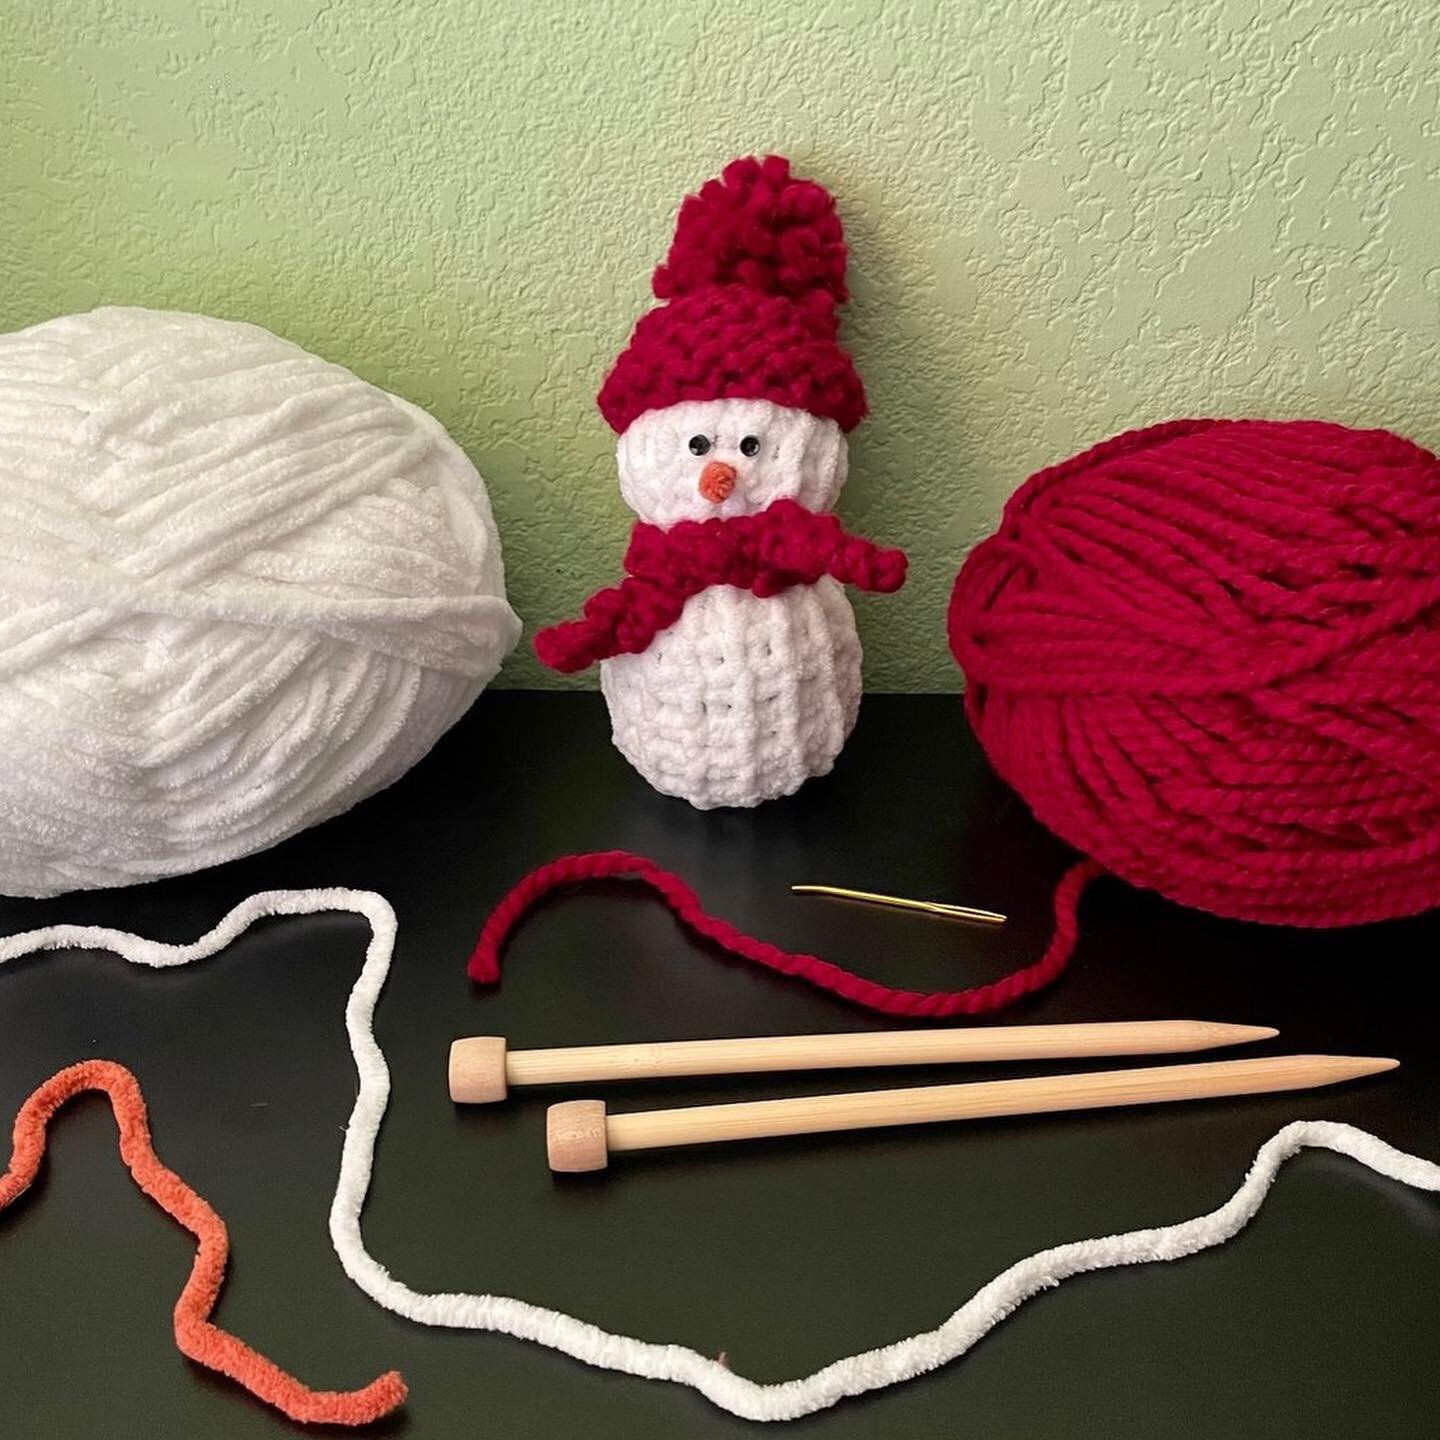 ⛄️Knitted Snowman🧶
The perfect little plushie to make for the holidays! 
Sign ups are open in December!
Visit campfashionista.net for more info

#knitting #knittedsnowman #visitsanjose